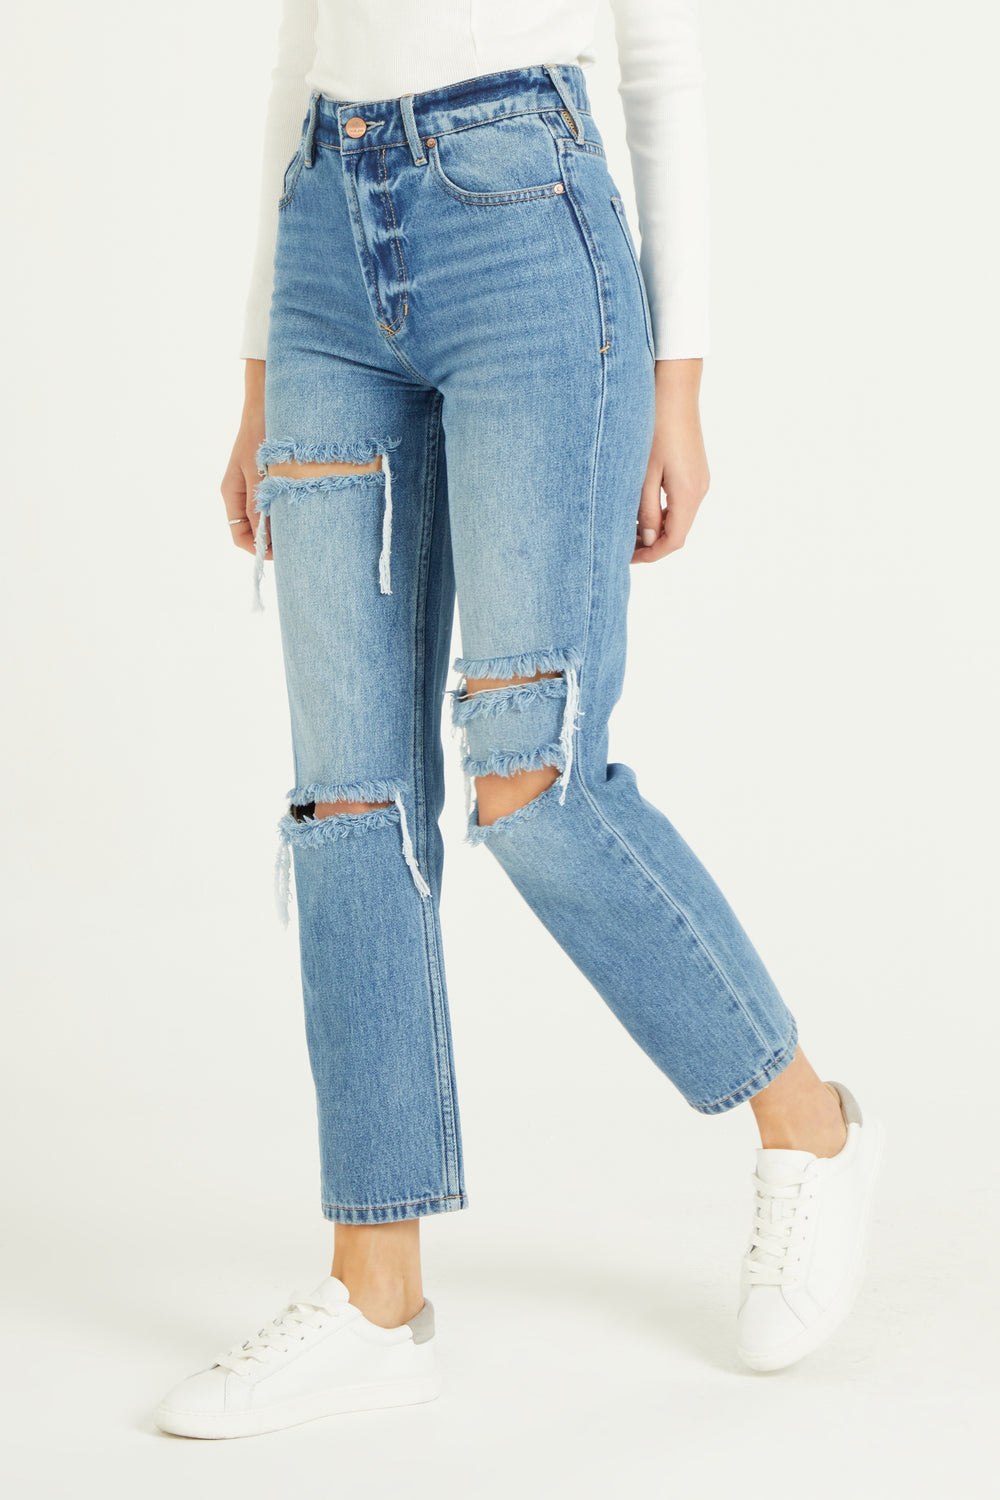 image of a female model wearing a 11" SUPER HIGH RISE JODI STRAIGHT IN SUNNYVALE JEANS